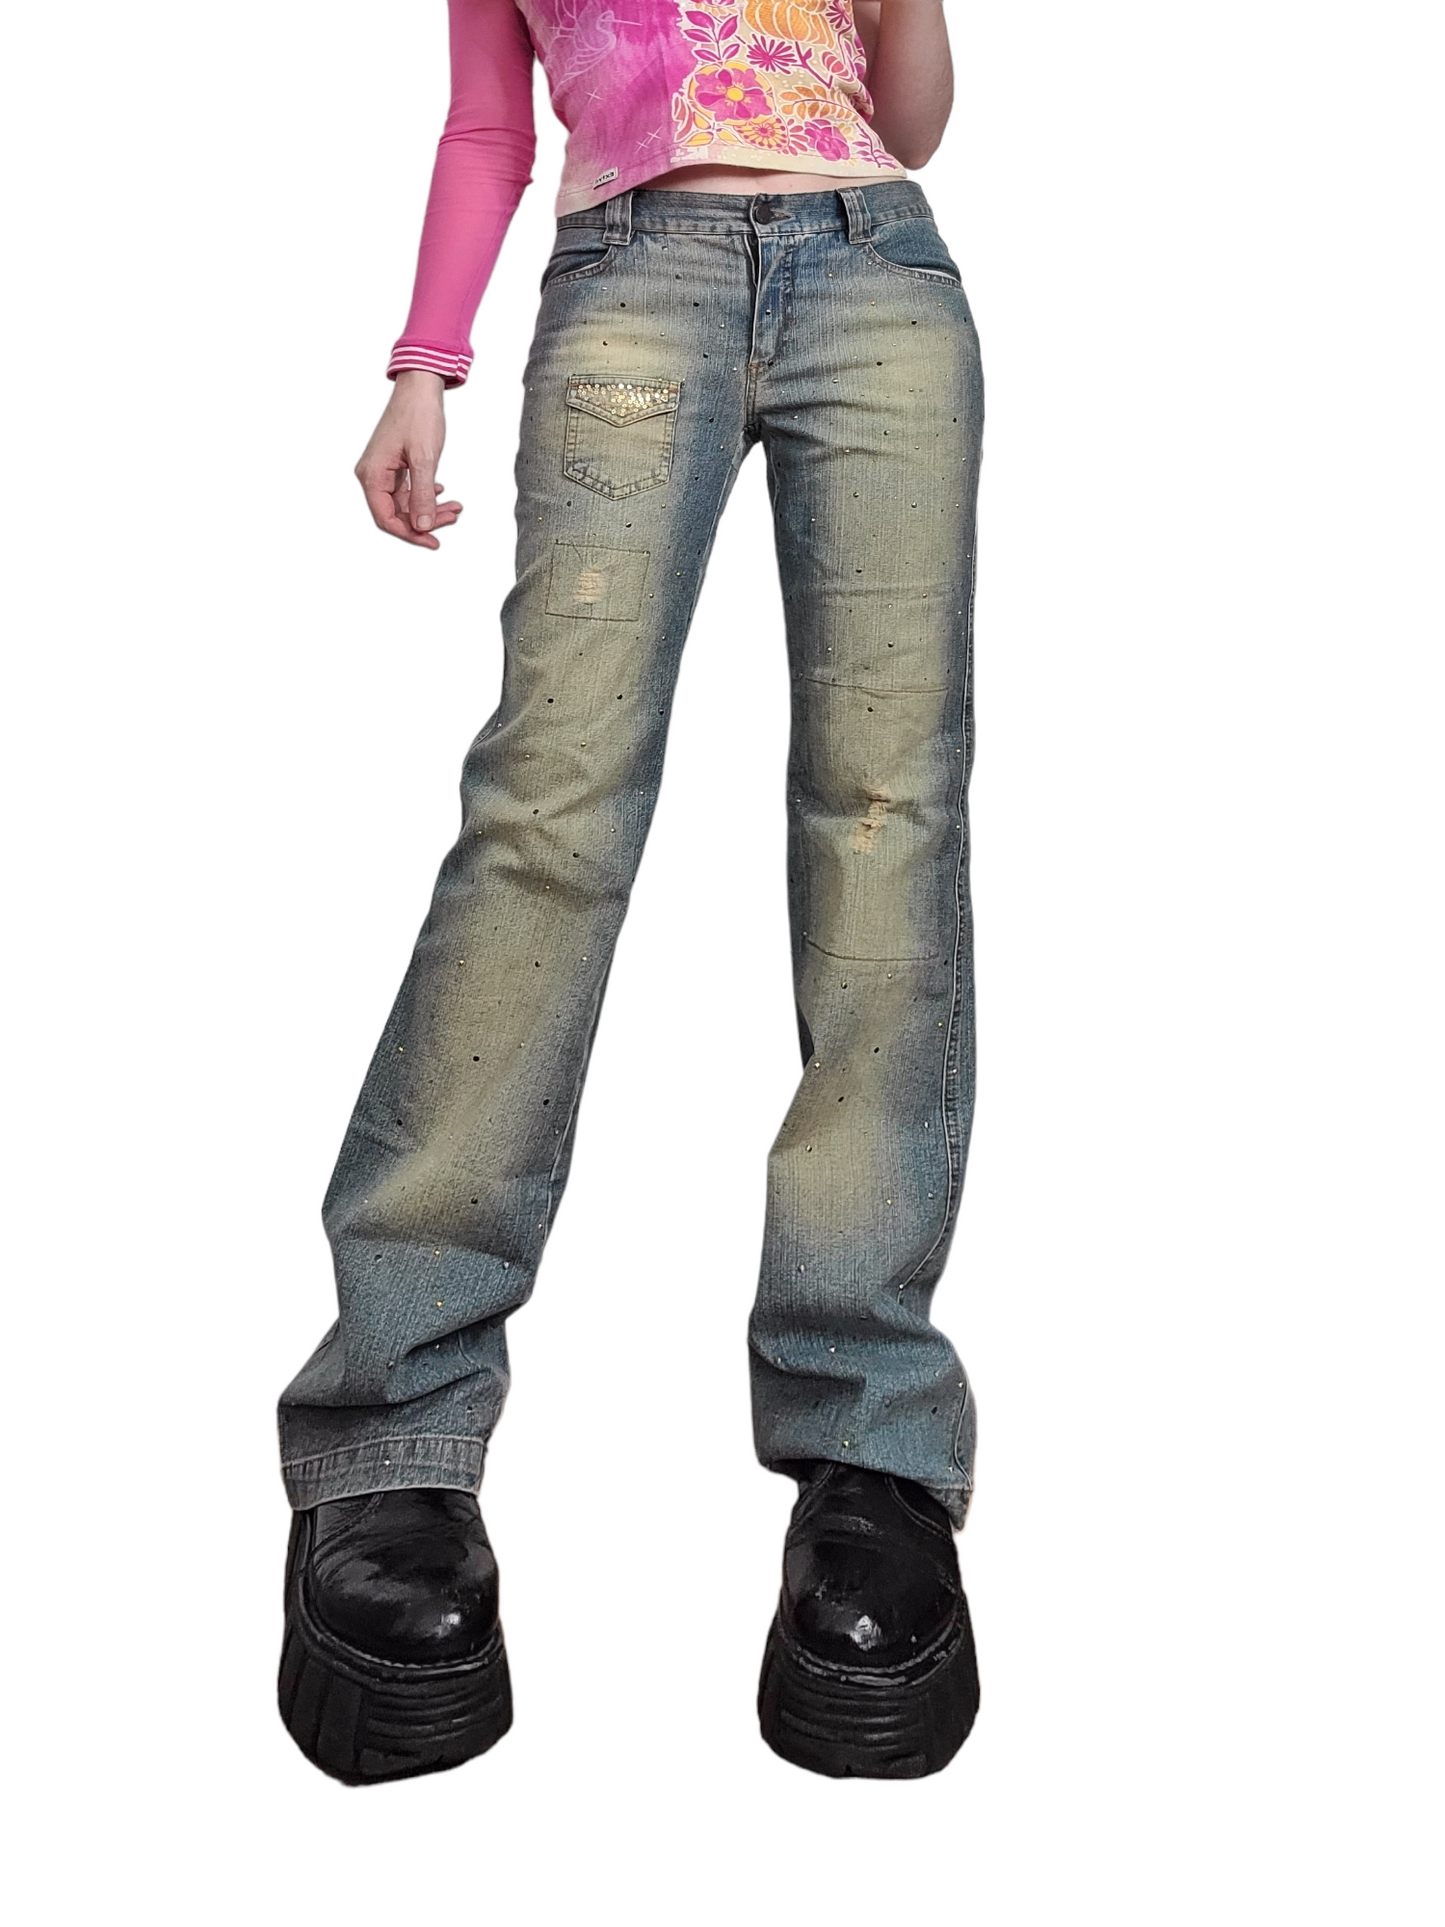 Jean pattes delephant flared y2k 2000s indie aesthetic bratz strass grunge 2000